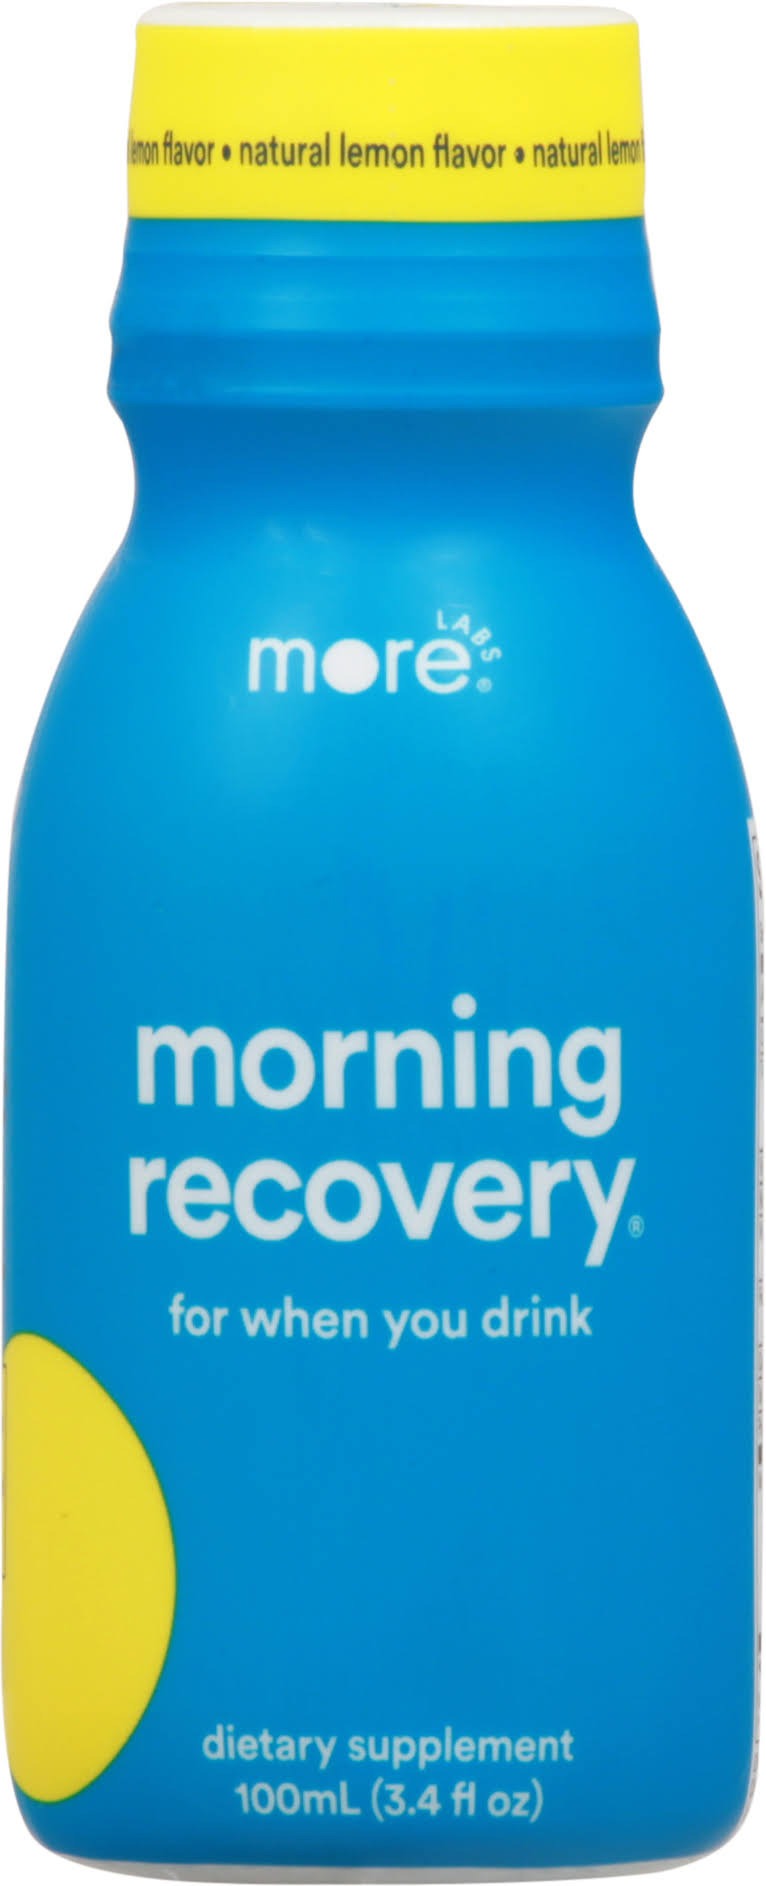 More Labs Morning Recovery, Natural Lemon Flavor - 100 ml